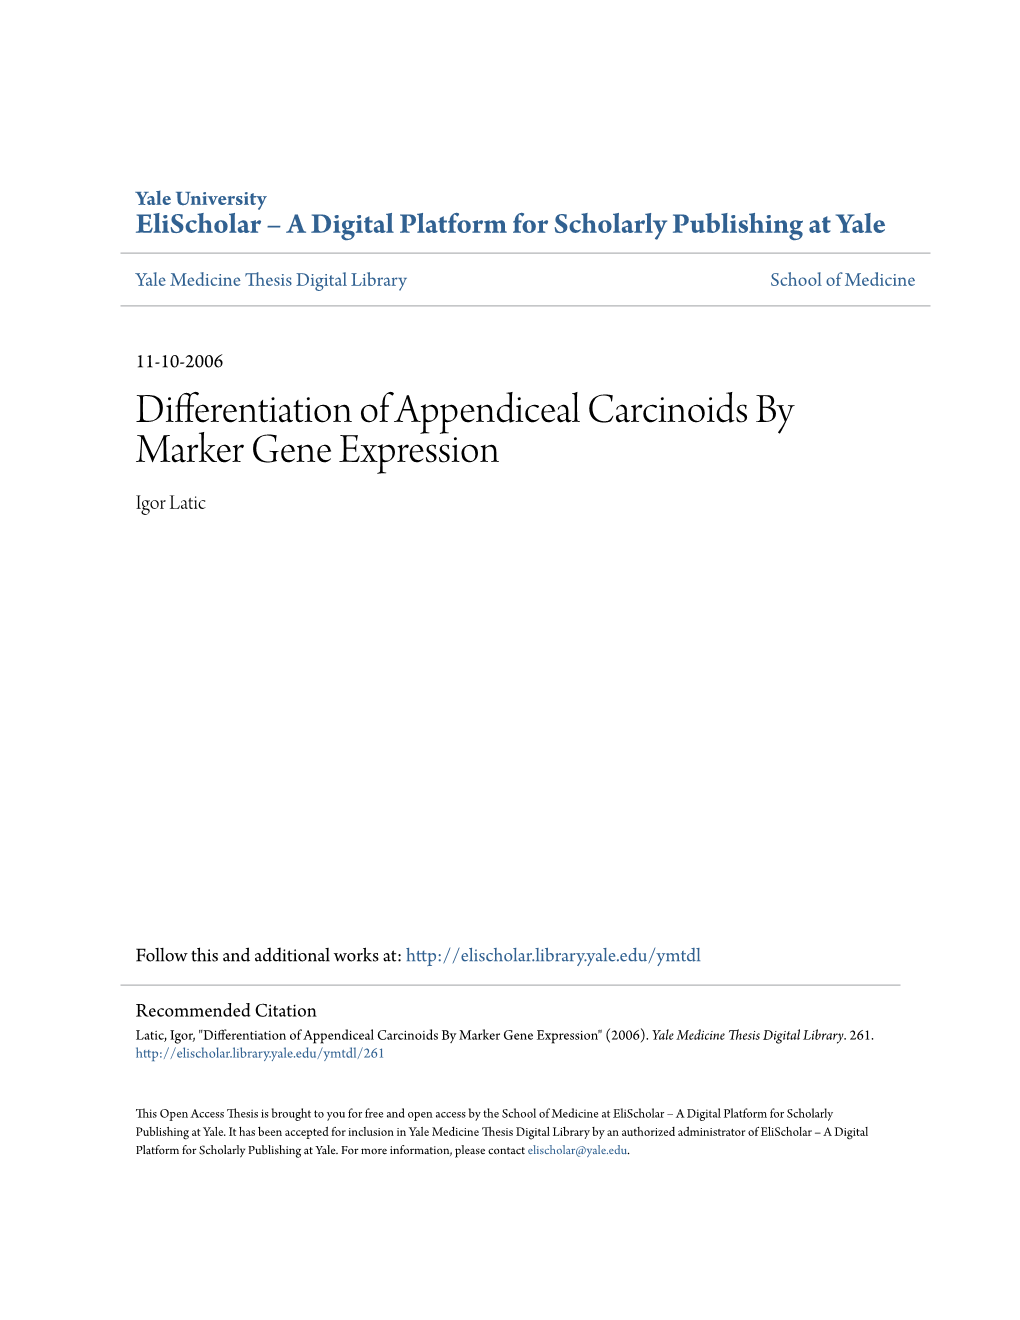 Differentiation of Appendiceal Carcinoids by Marker Gene Expression Igor Latic